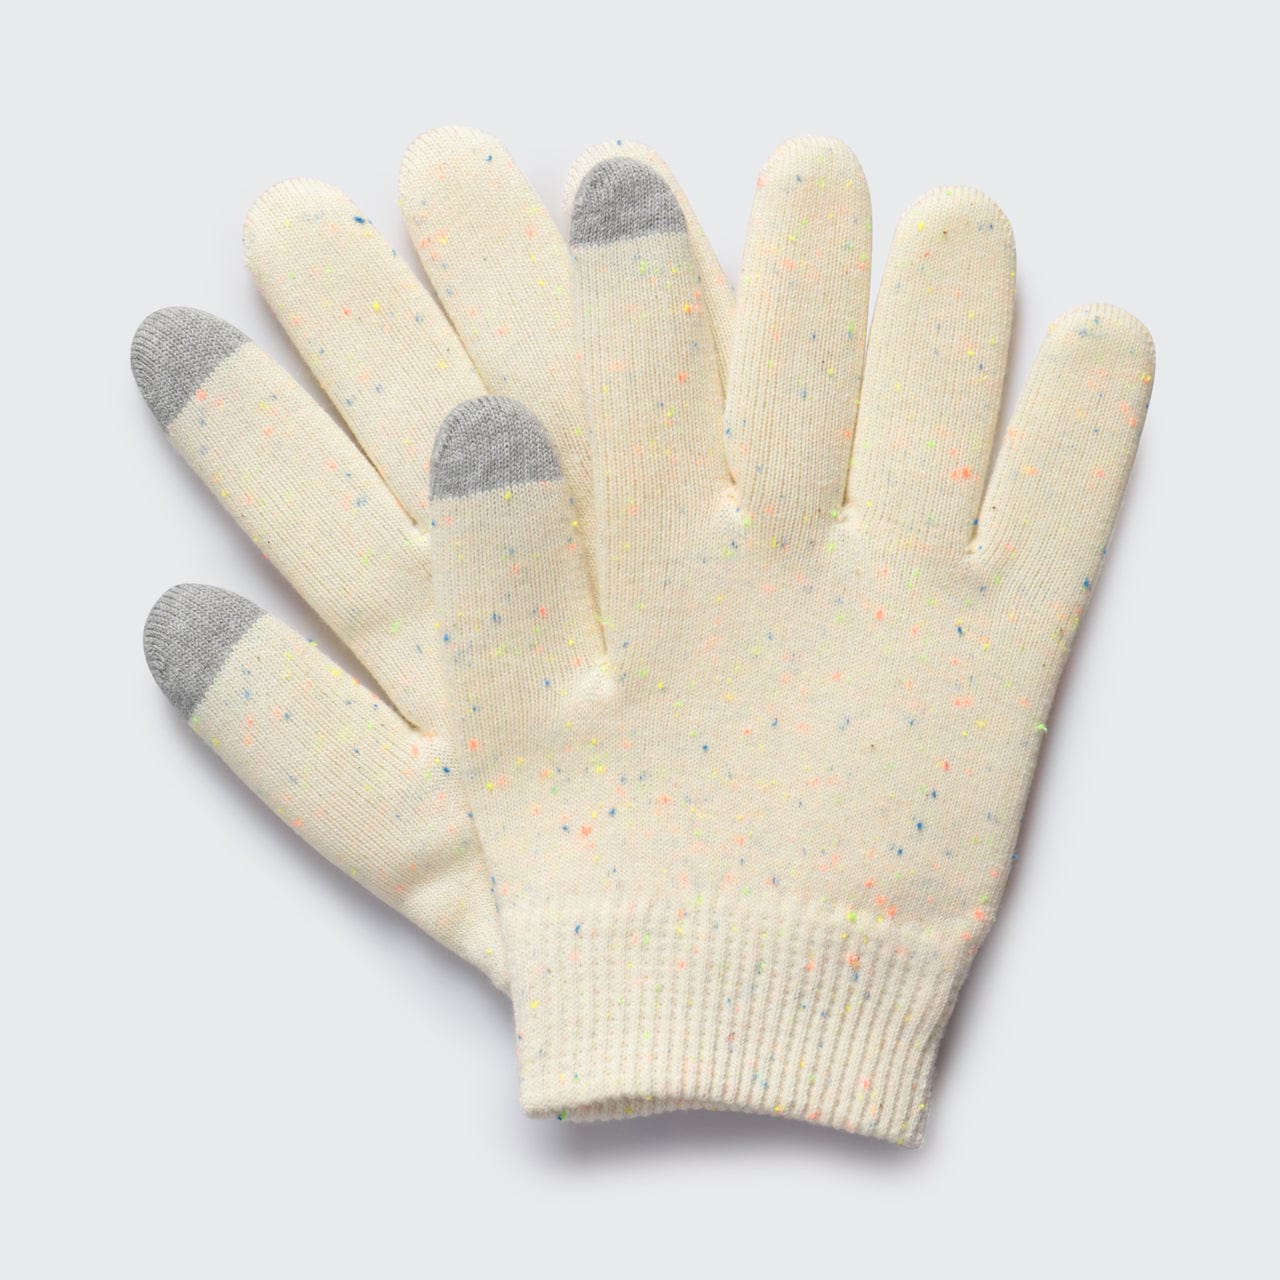 Moisturizing Spa Gloves Cleanse Cleanse 